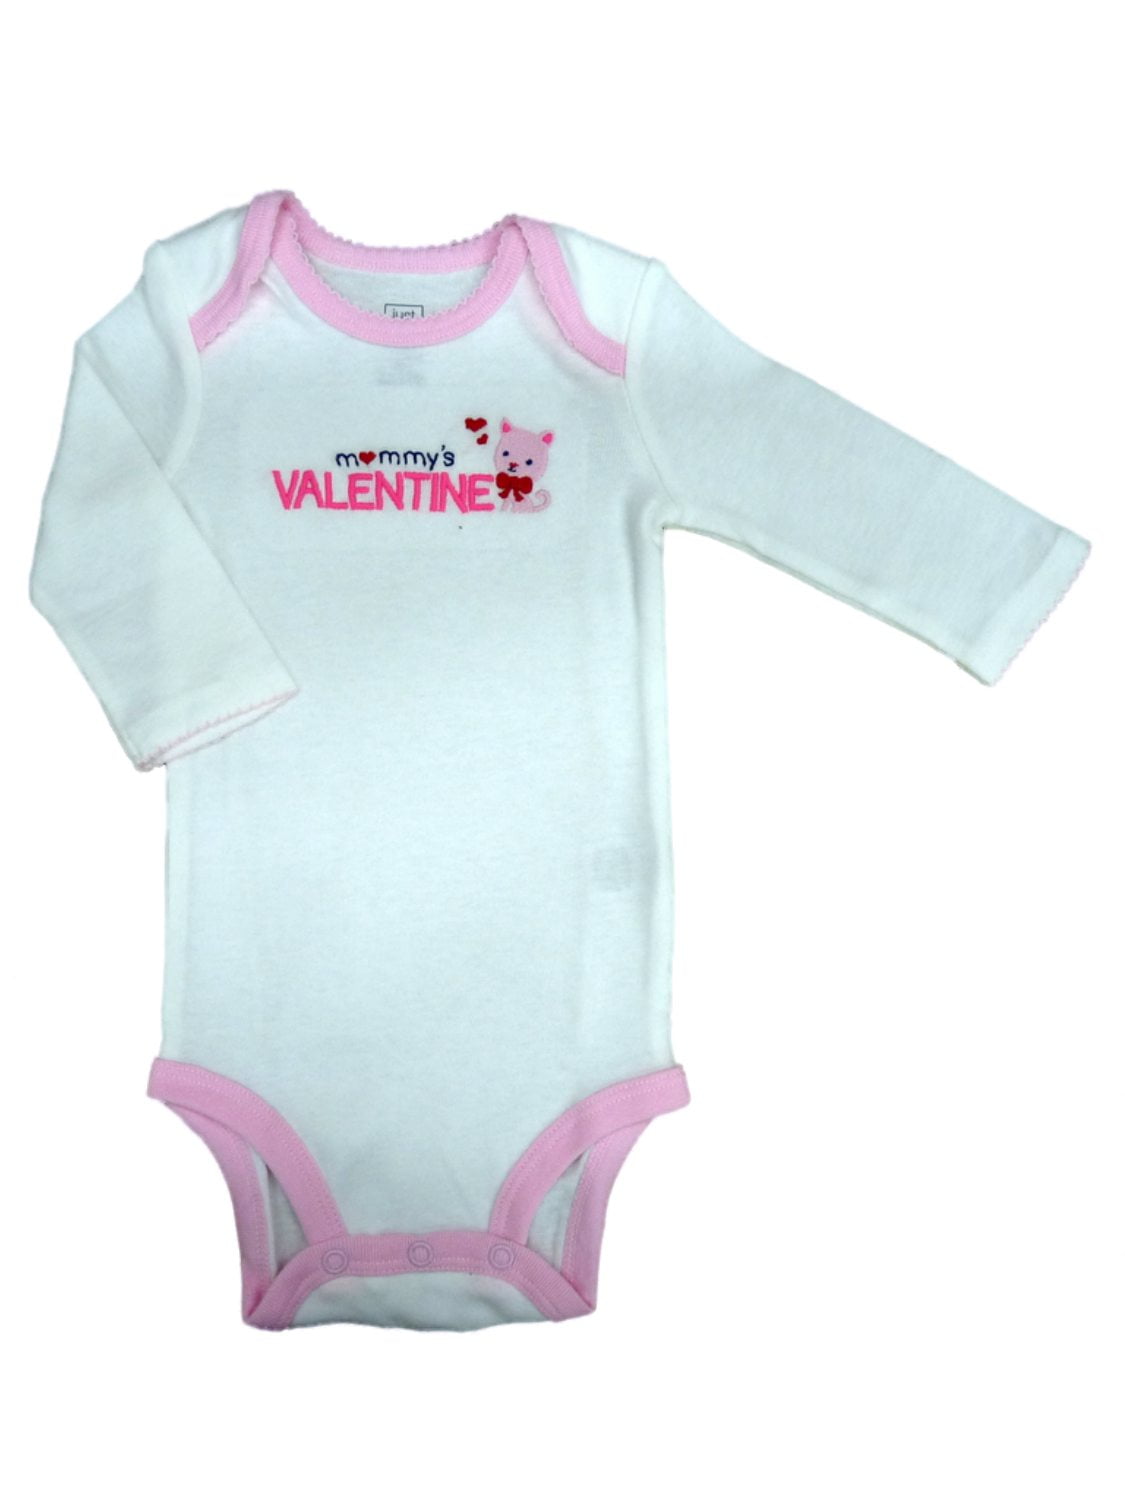 NEW! 3-12 Months Valentine's Day Carters Mommy Forever Infant Bodysuit 